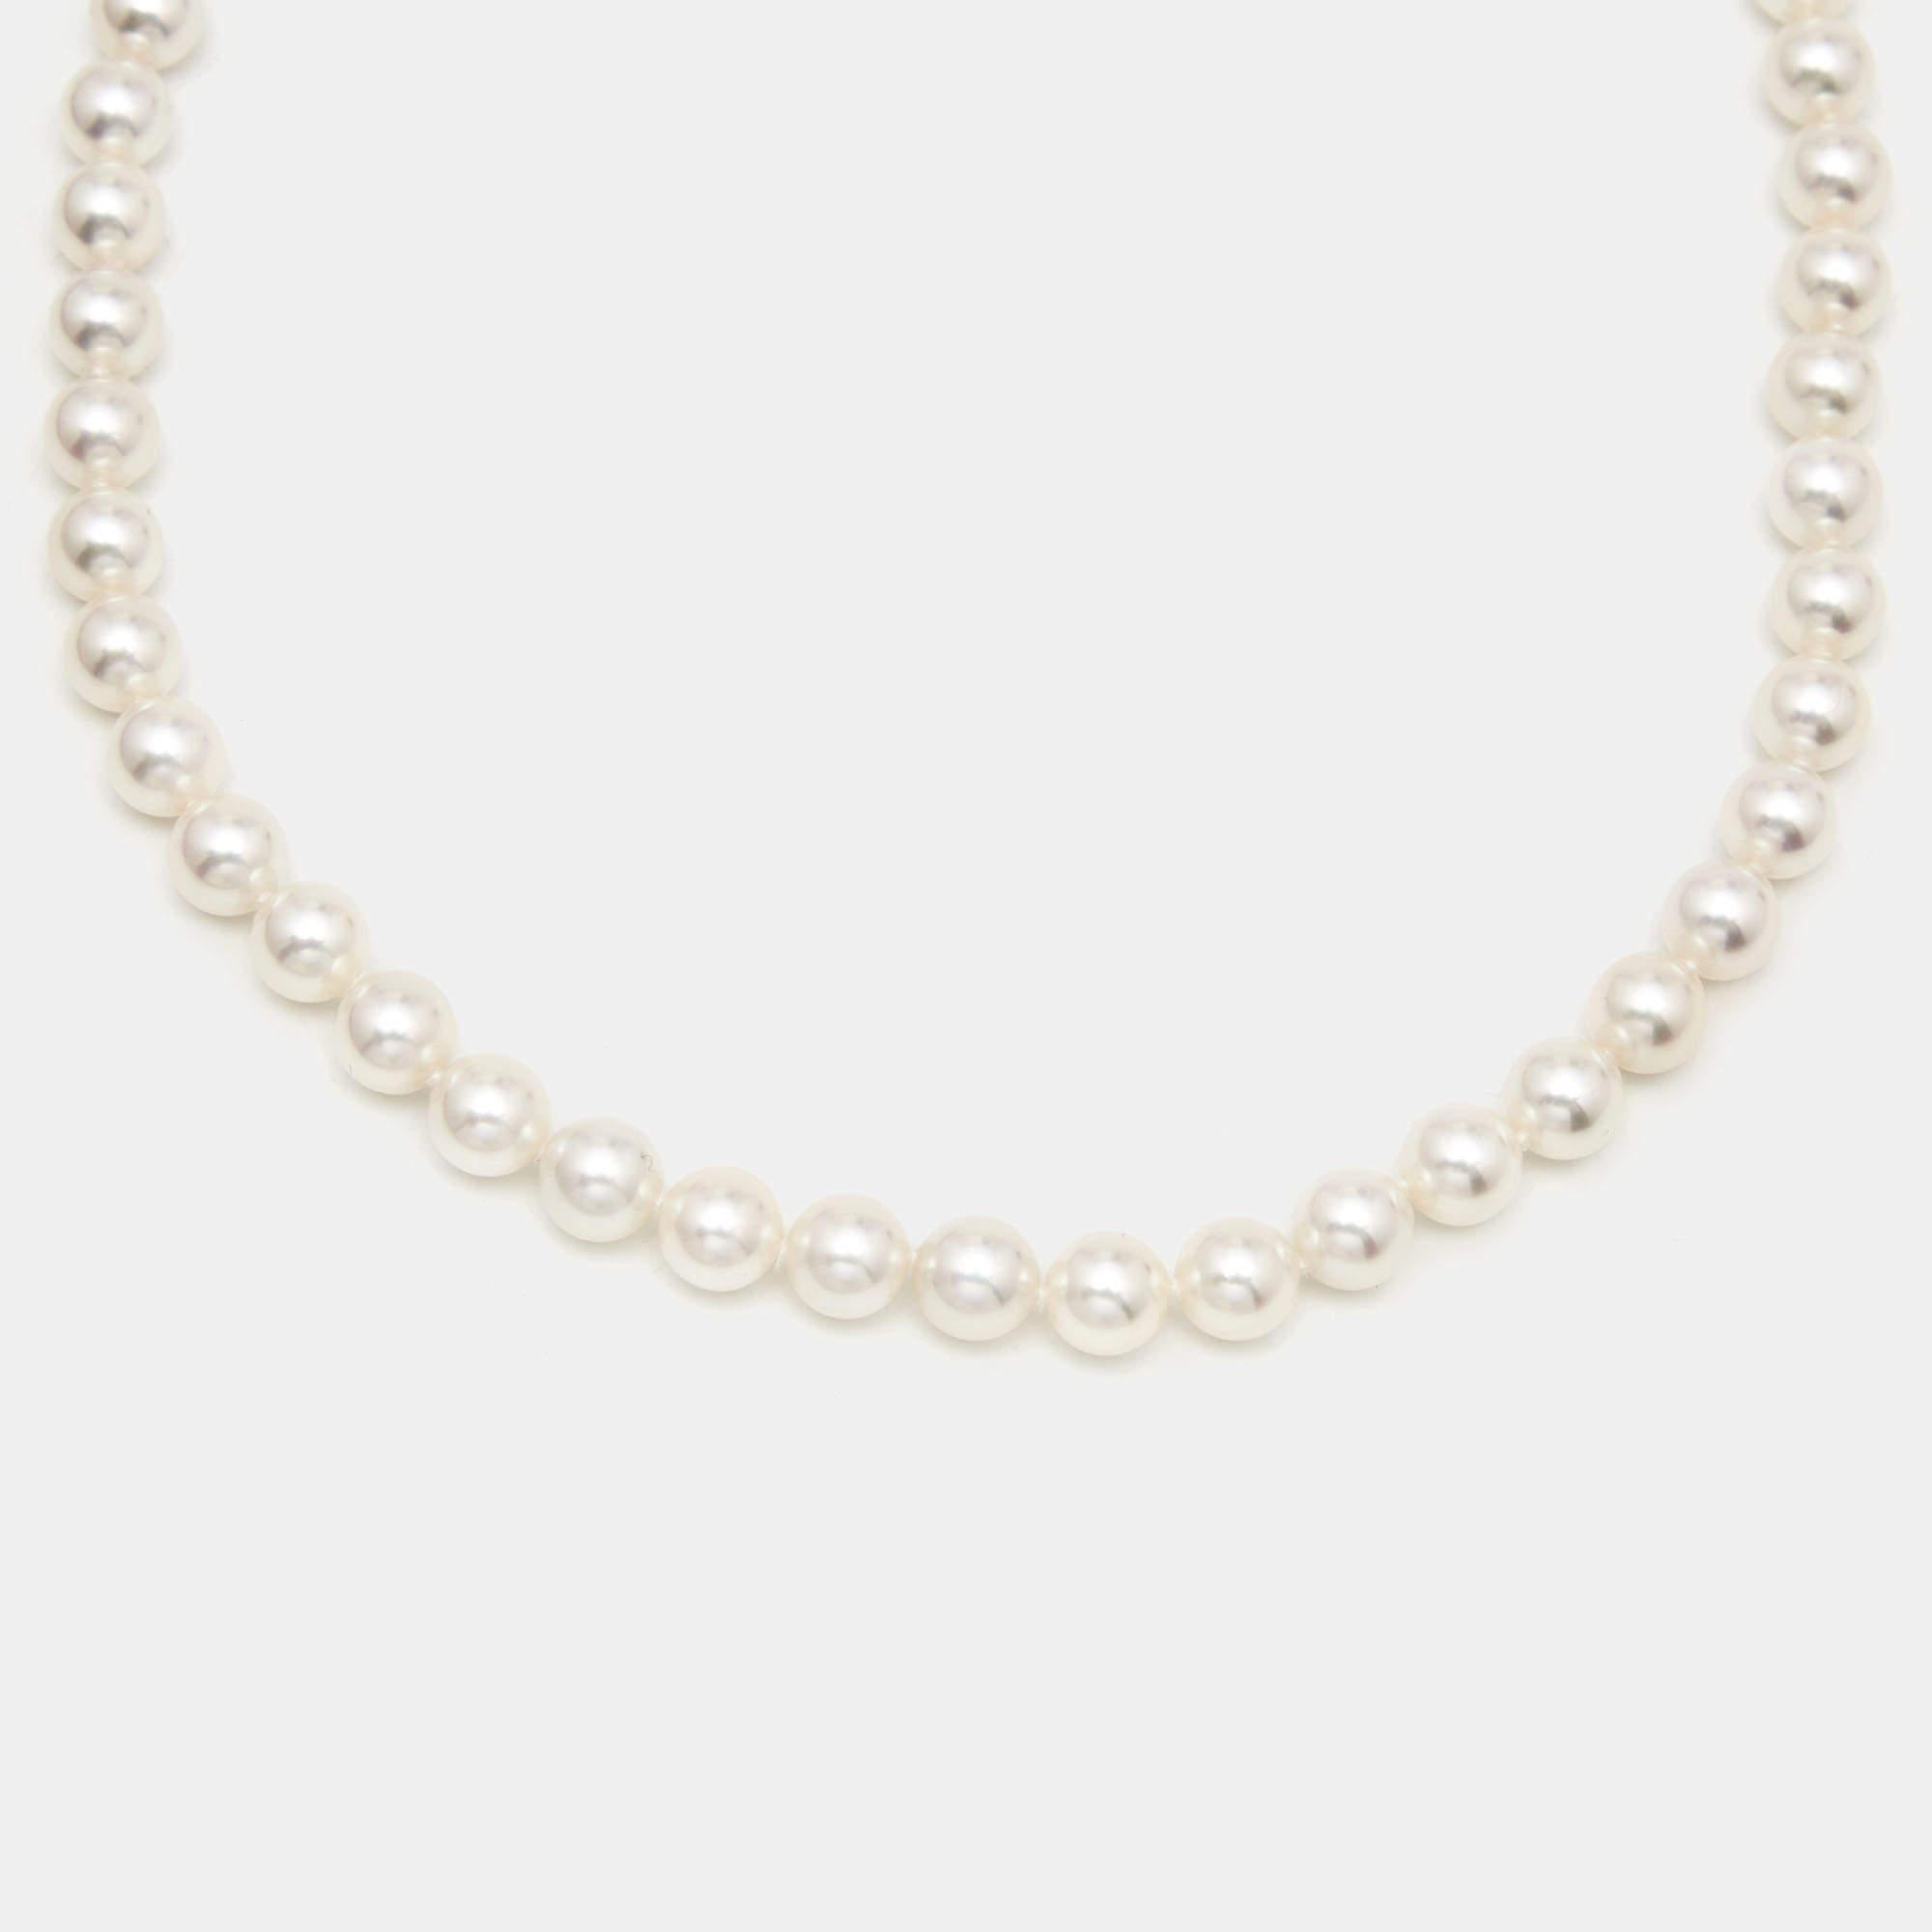 There is nothing more elegant and ladylike than a classic pearl necklace. This Tiffany & Co. Signature x Cultured Pearls necklace is linked in 18K white gold chain. This can be a great gift for the lady in your life and can be totally worn for day